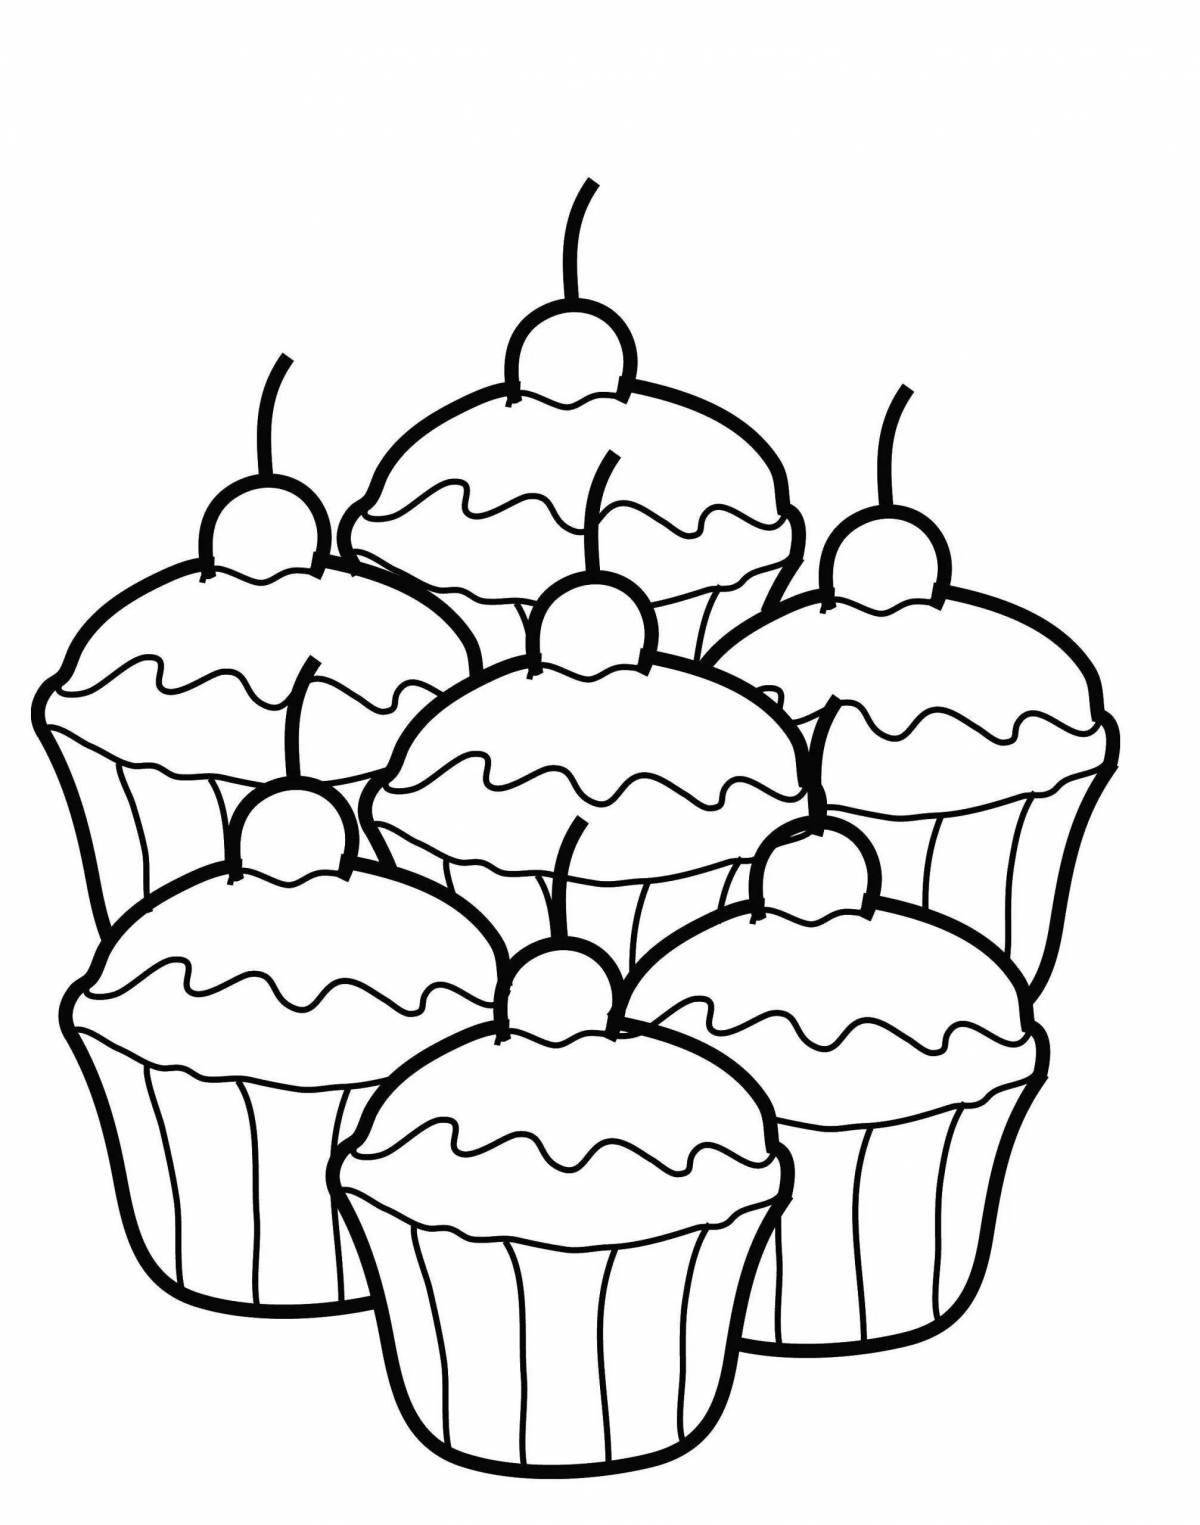 Decadent dessert coloring page